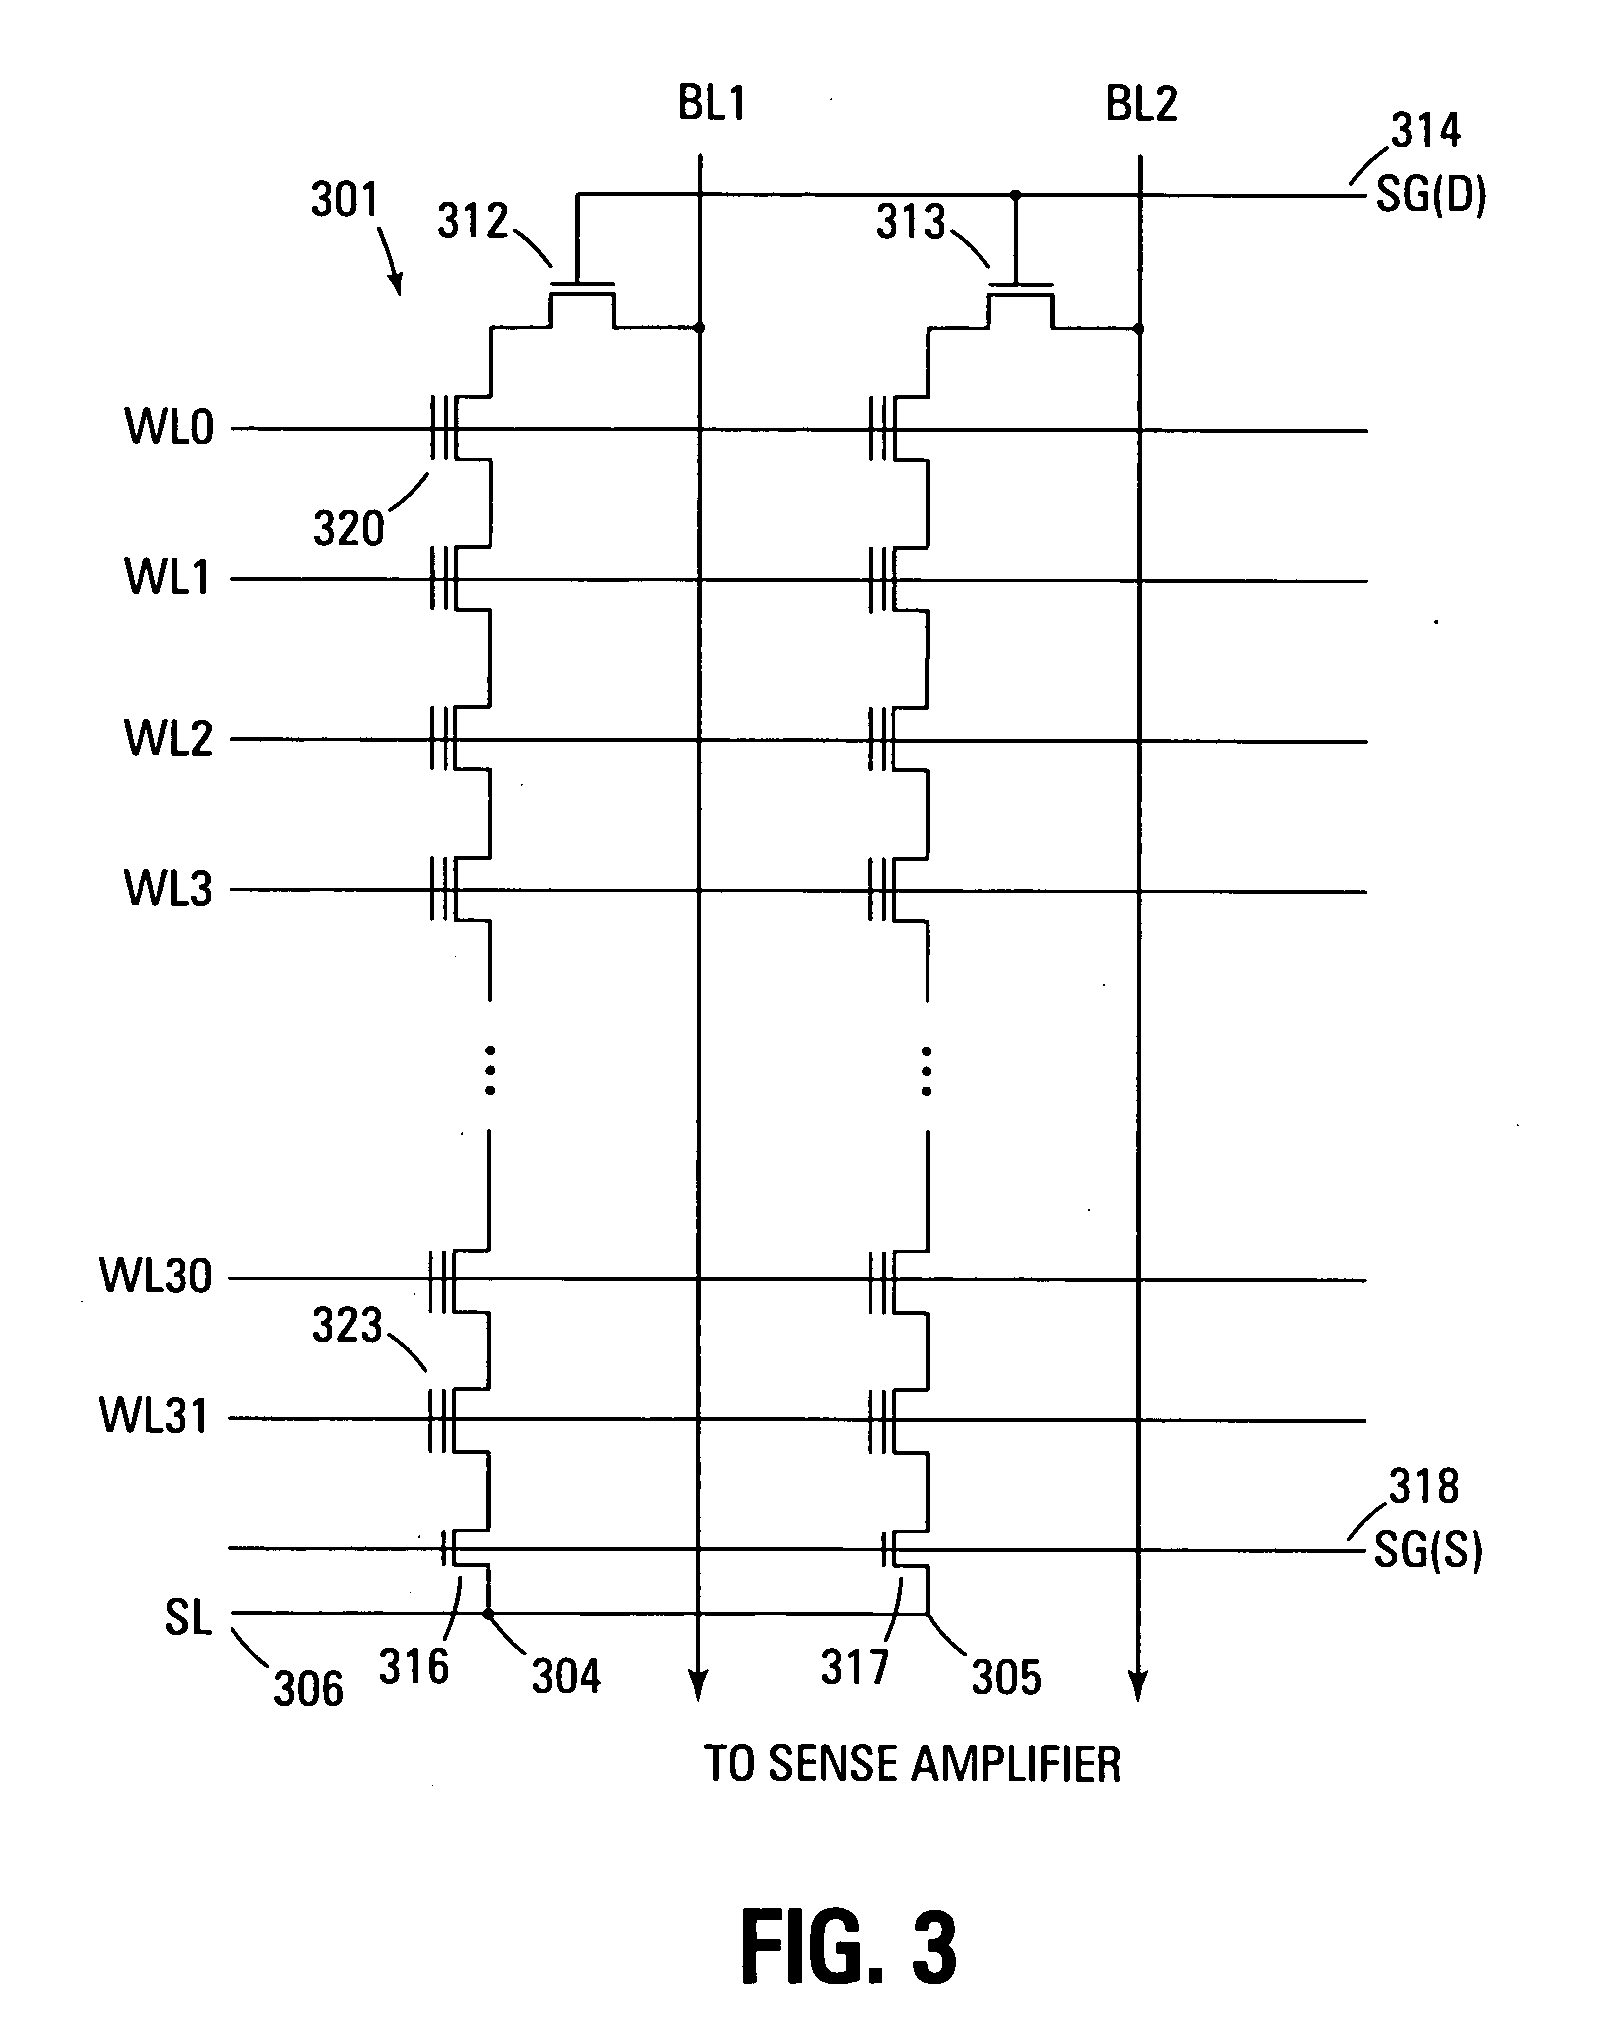 Memory block quality identification in a memory device